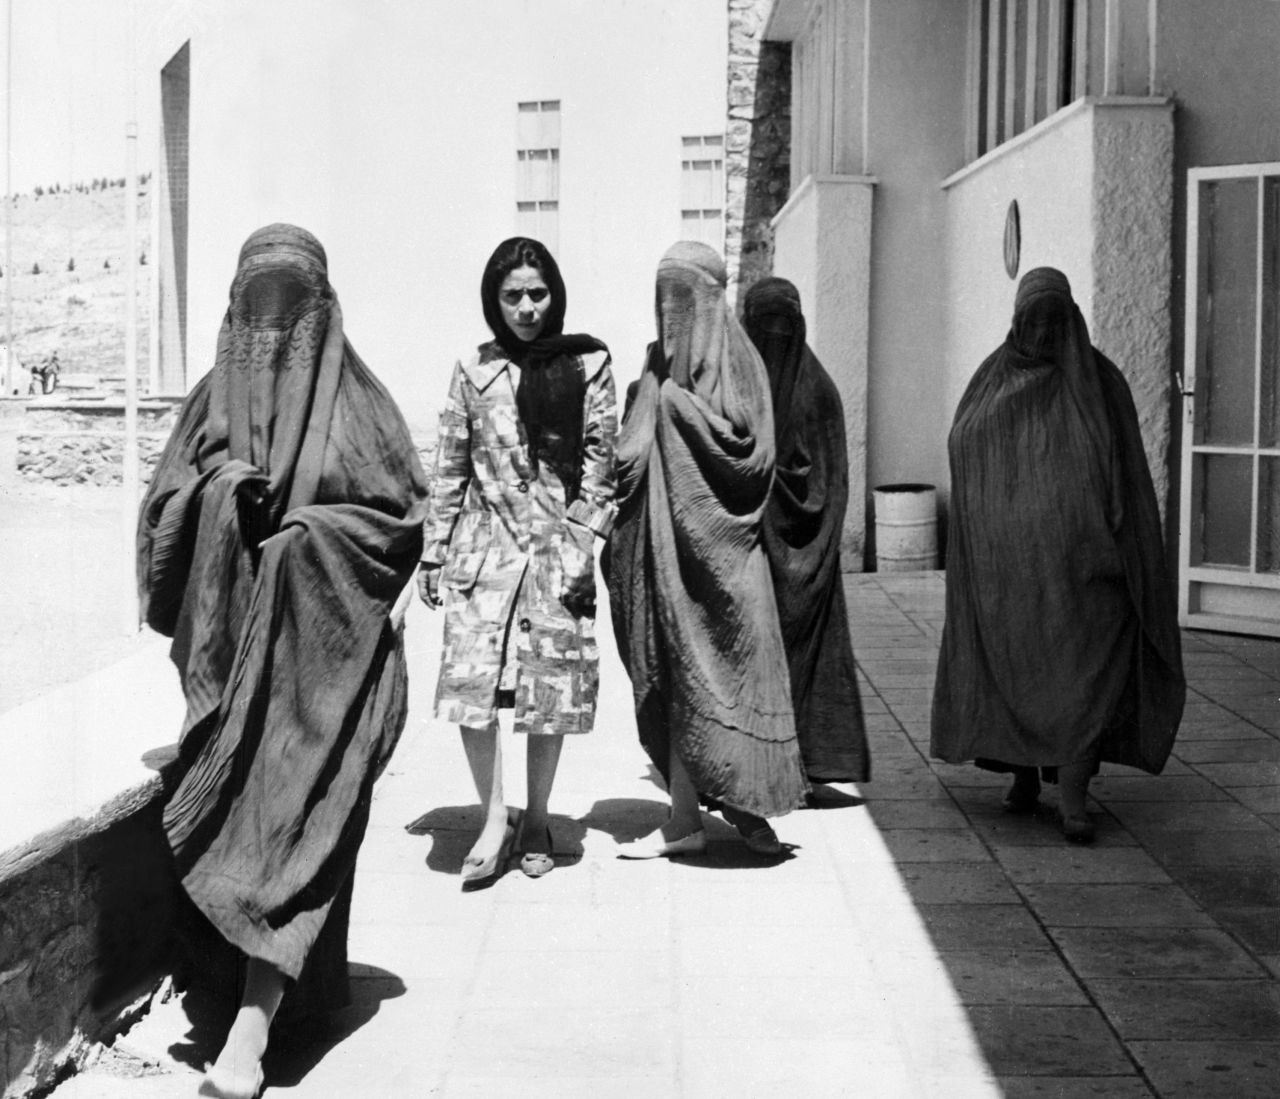 Taken in 1962, this picture shows Afghan women walking along a street in Kabul. Four of them are wearing burqas, whereas one walks comfortably among them in European-style dress. "When the mujahideen-led government replaced the Soviets in 1992, new restrictions on dress were formalized," says Mosadiq, "and obviously the Taliban's takeover in 1994 was the final nail in the coffin for any kind of independent dress for both men and women."